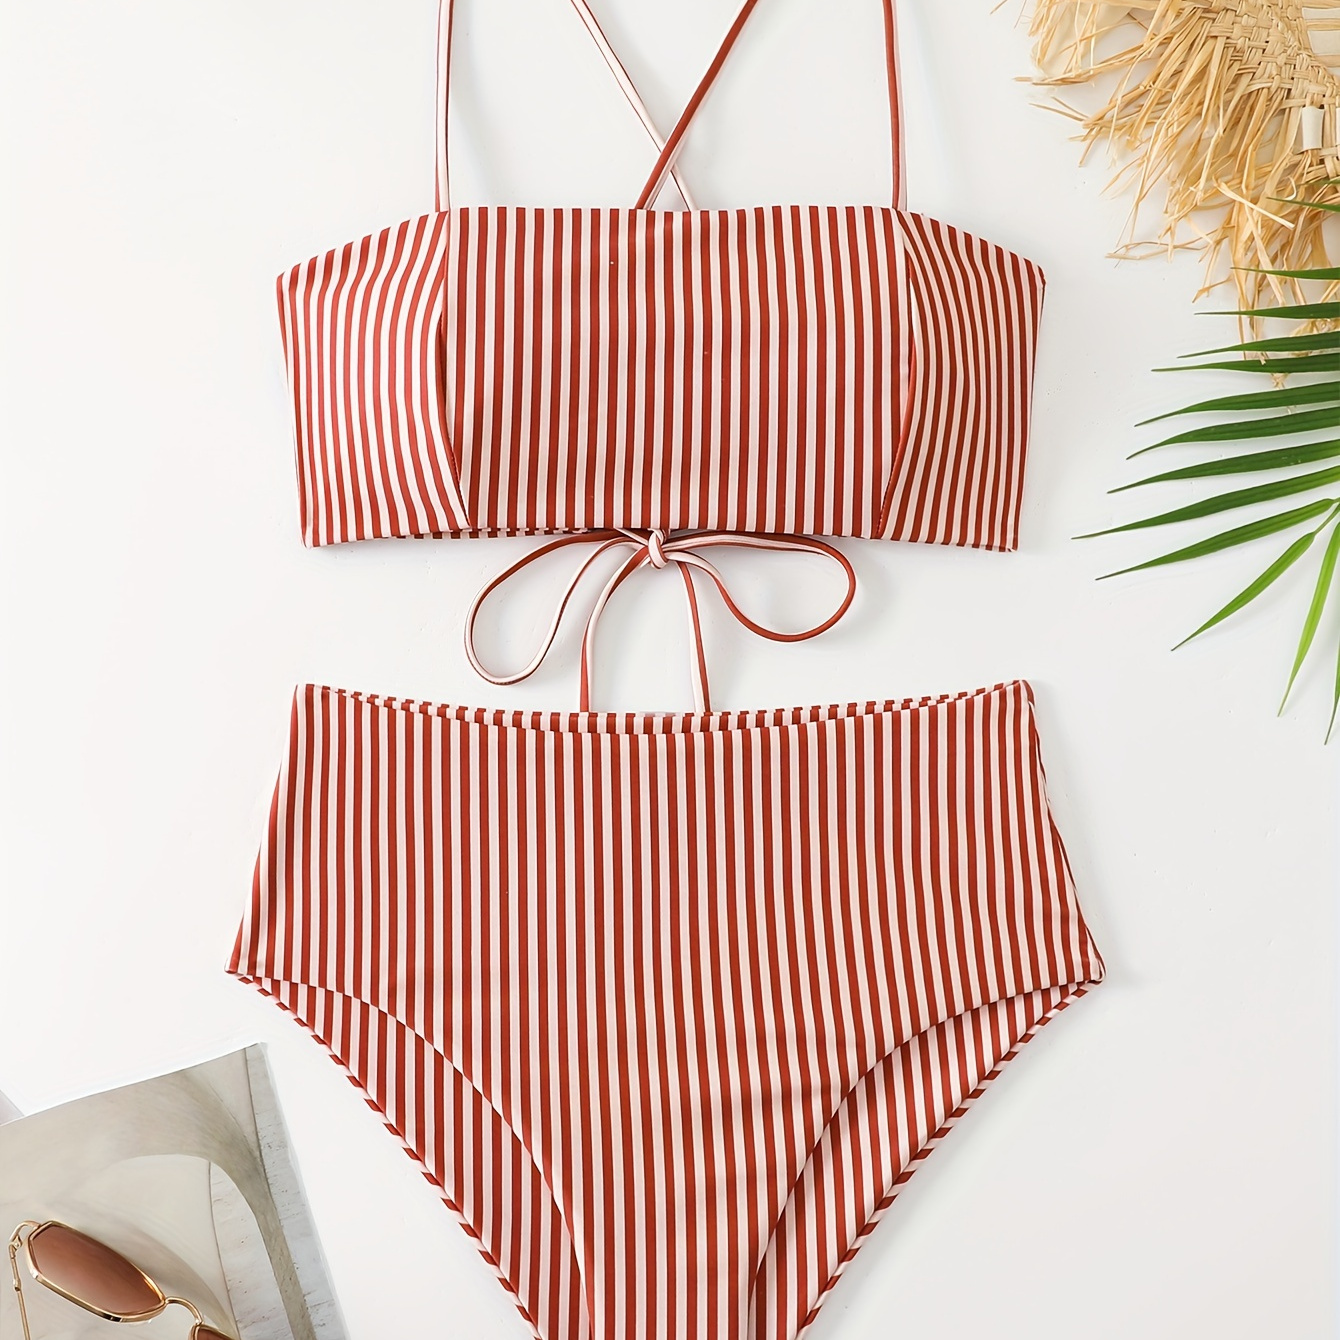 

Red Striped Print Lace Up Tie Back 2 Piece Set Bikini, Criss Cross Hollow Out High Wasted Stretchy Retro Swimsuits, Women's Swimwear & Clothing